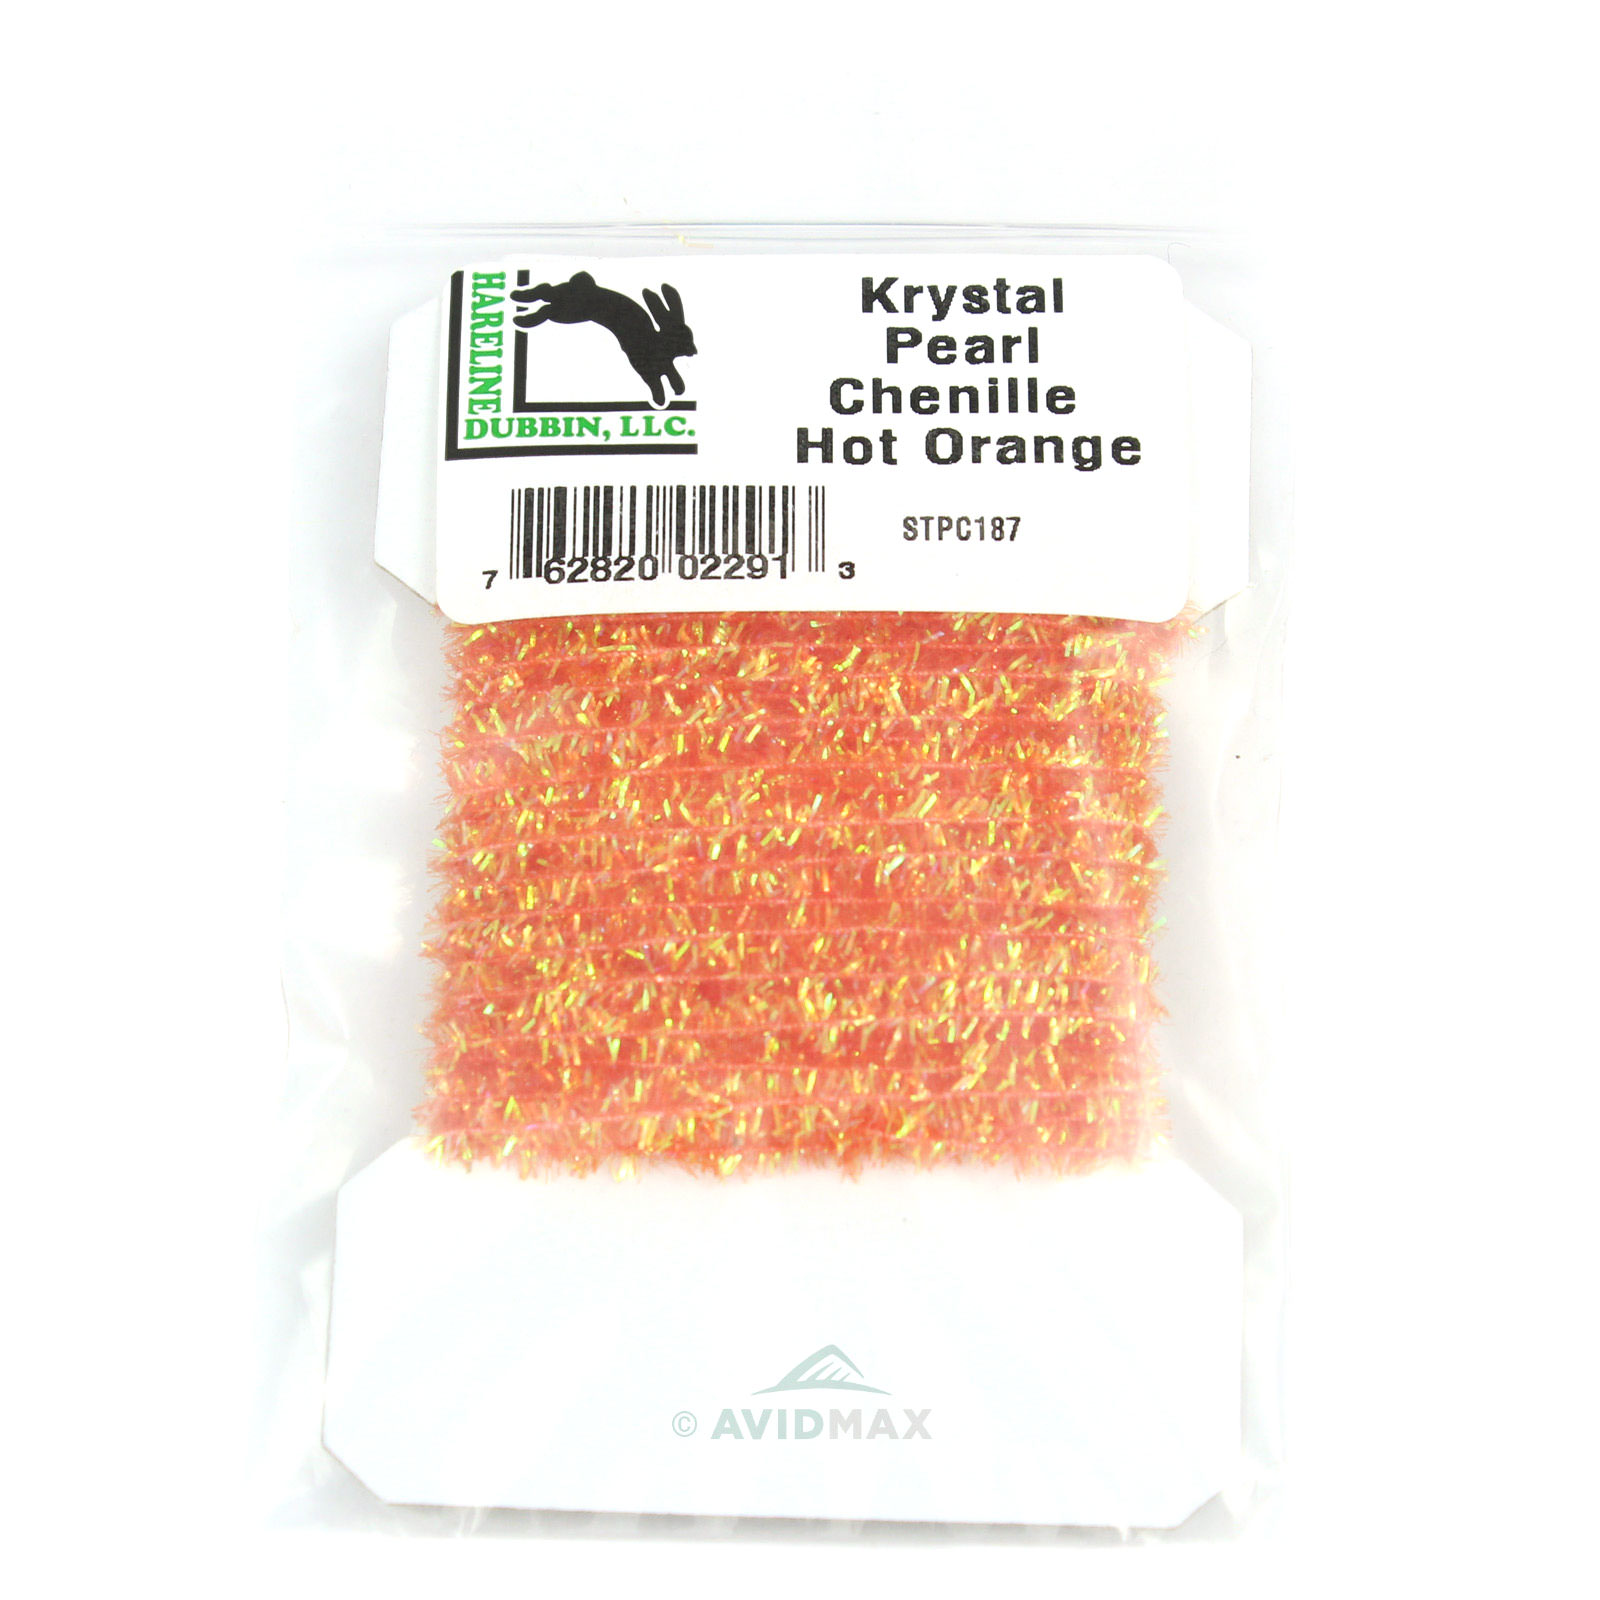 SOLID TINSEL & KRYSTAL PEARL CHENILLE - Hareline Fly Tying & Jig Material  NEW!